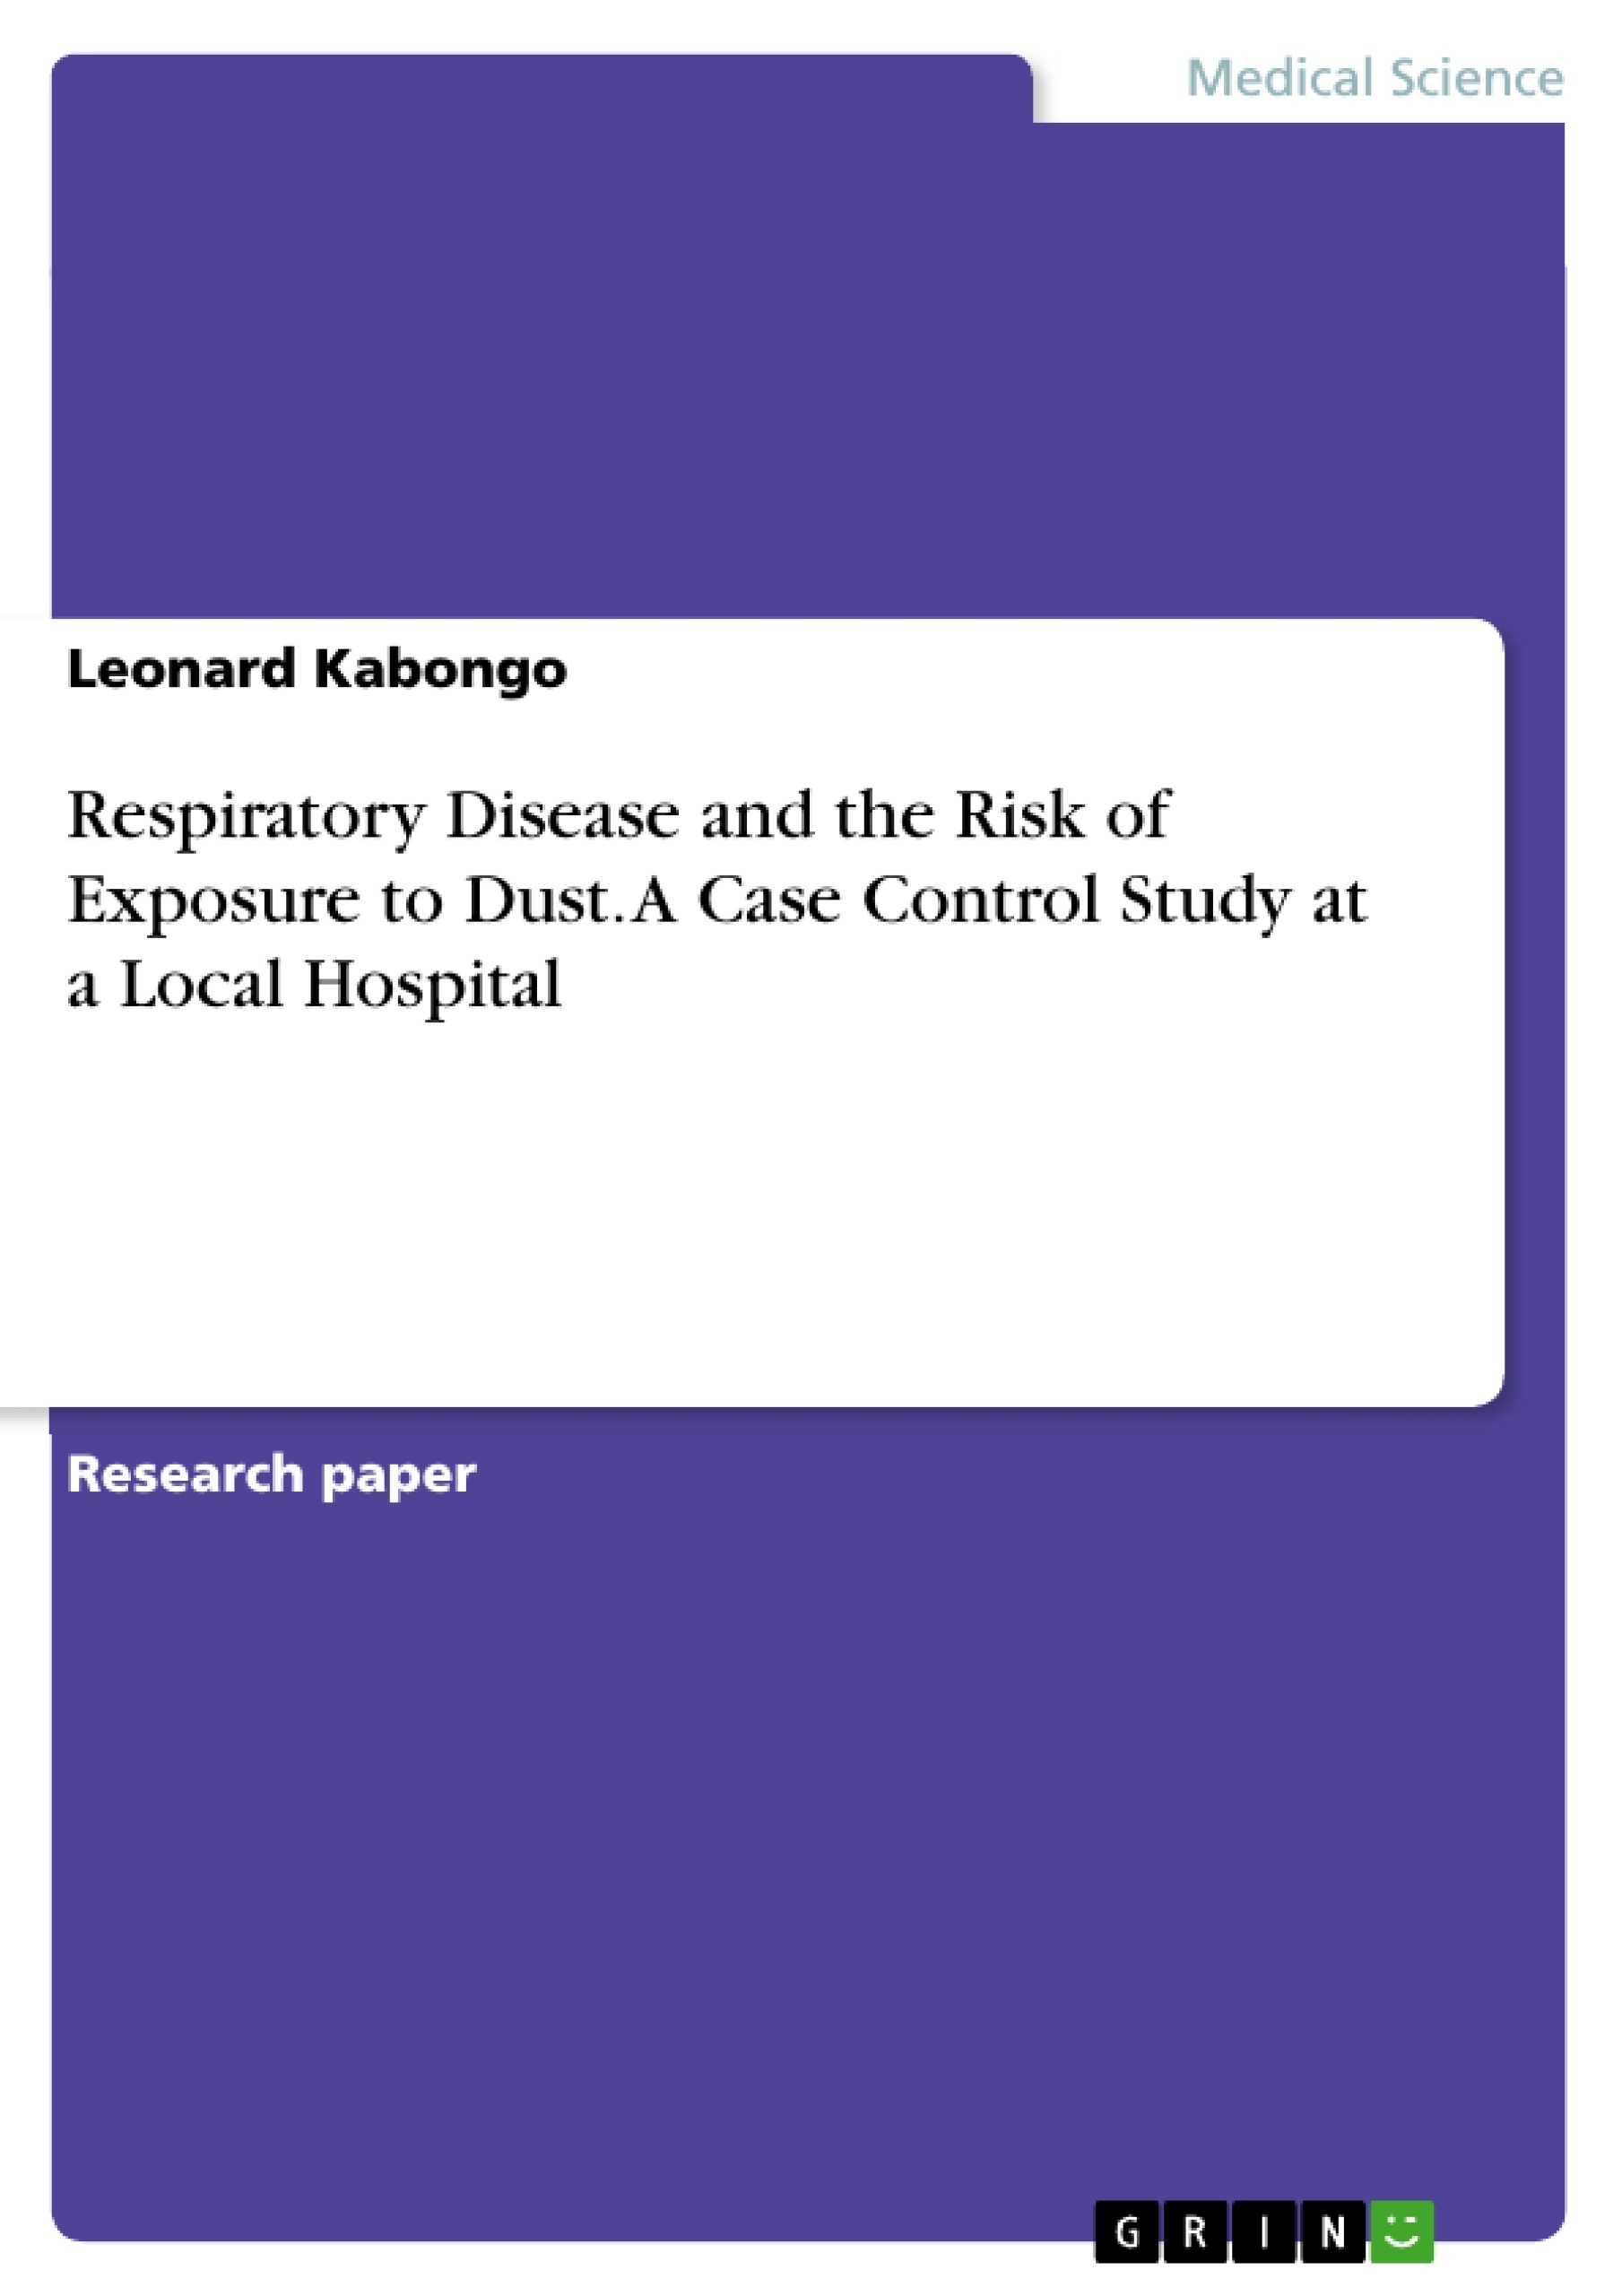 Title: Respiratory Disease and the Risk of Exposure to Dust. A Case Control Study at a Local Hospital